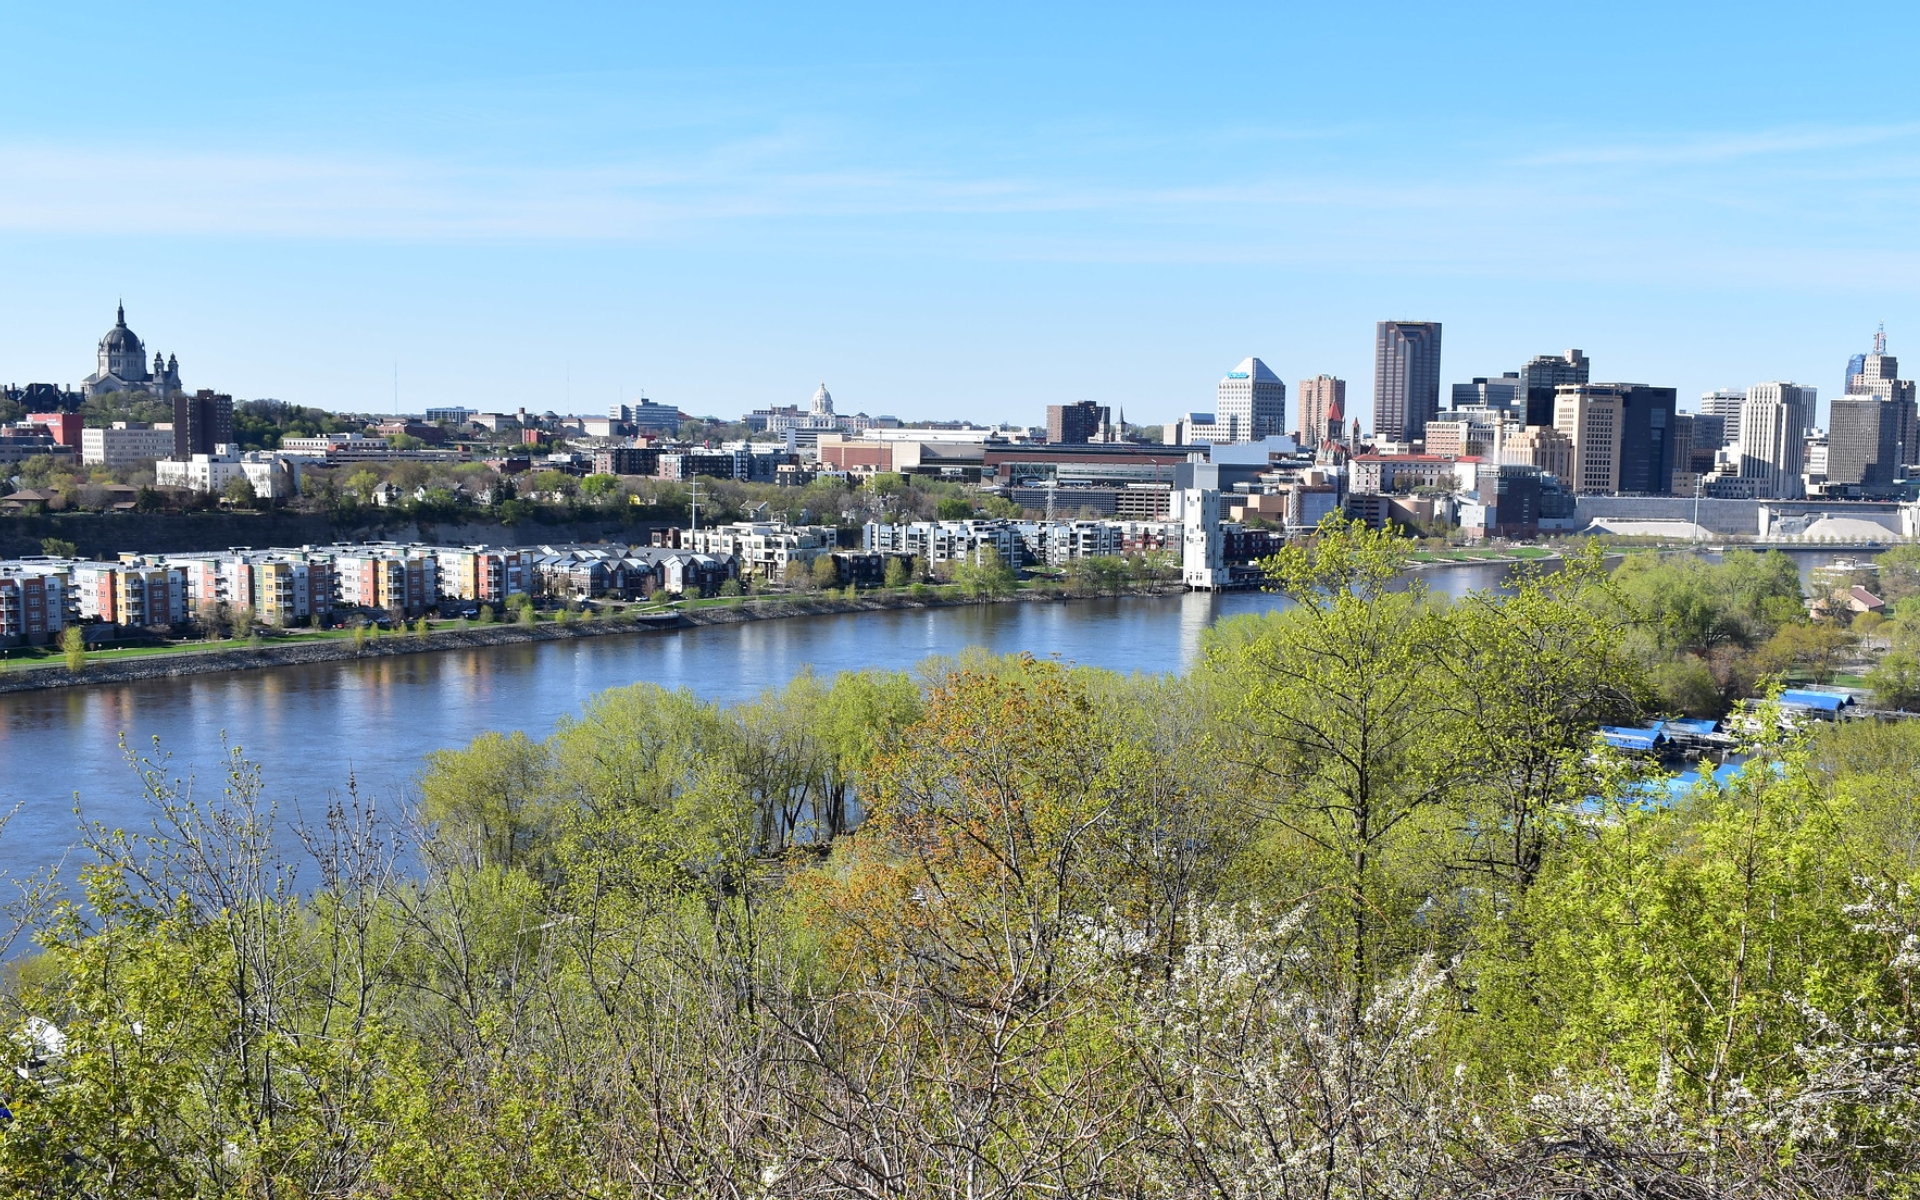 The downtown St. Paul skyline stretches across the top of the frame, with the river and residential housing in the foreground.